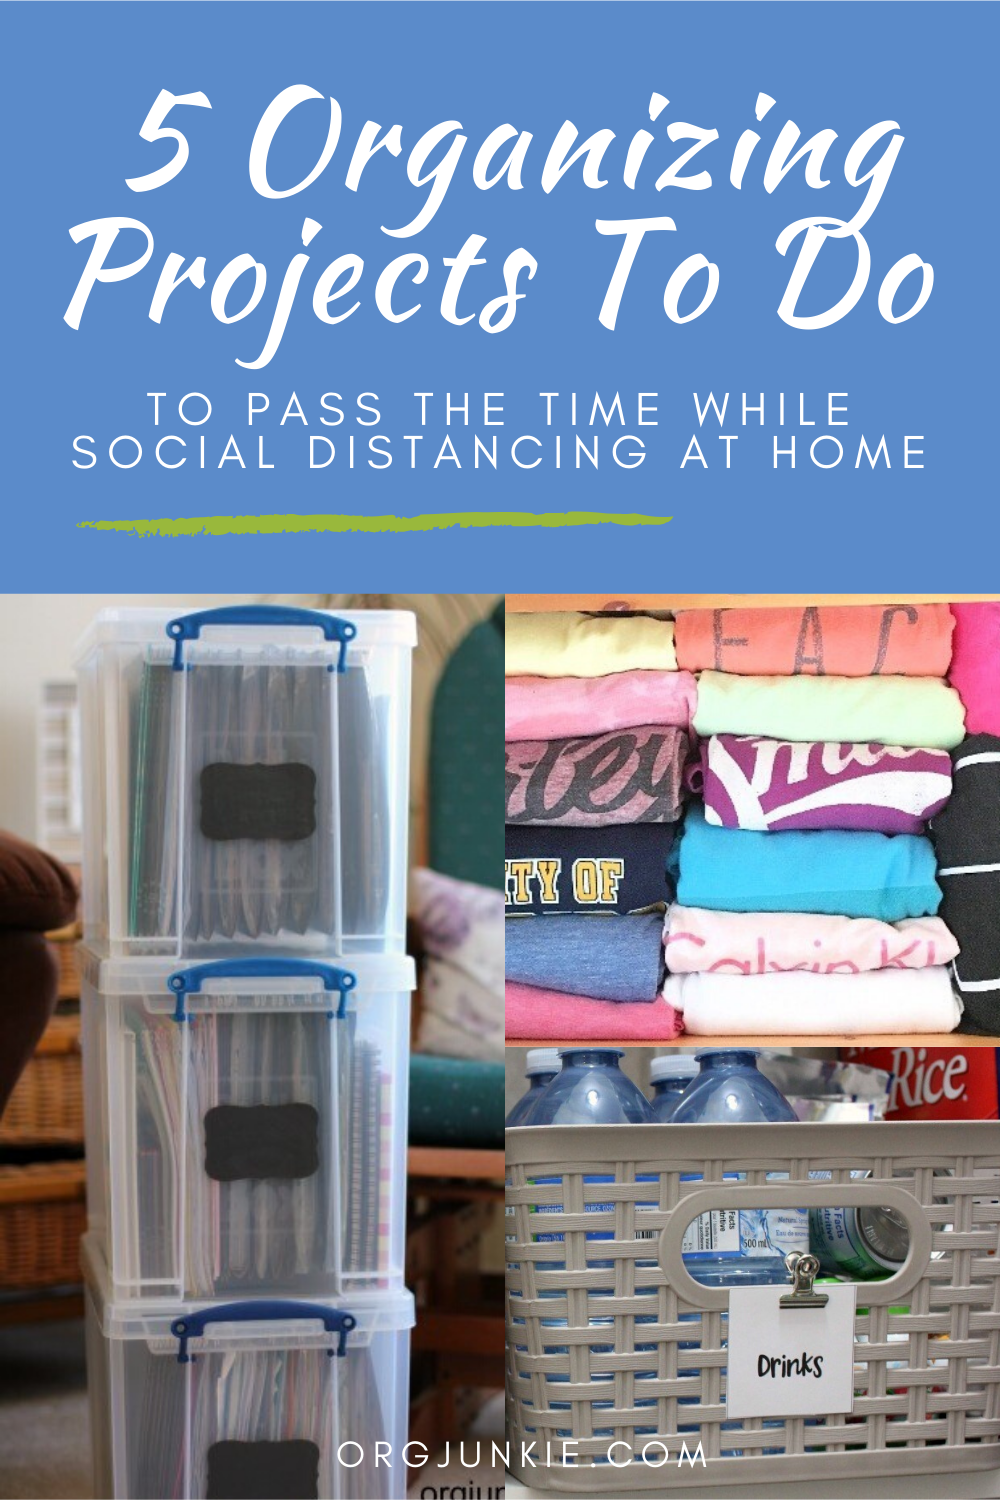 5 Organizing Projects To Do While Social Distancing at Home